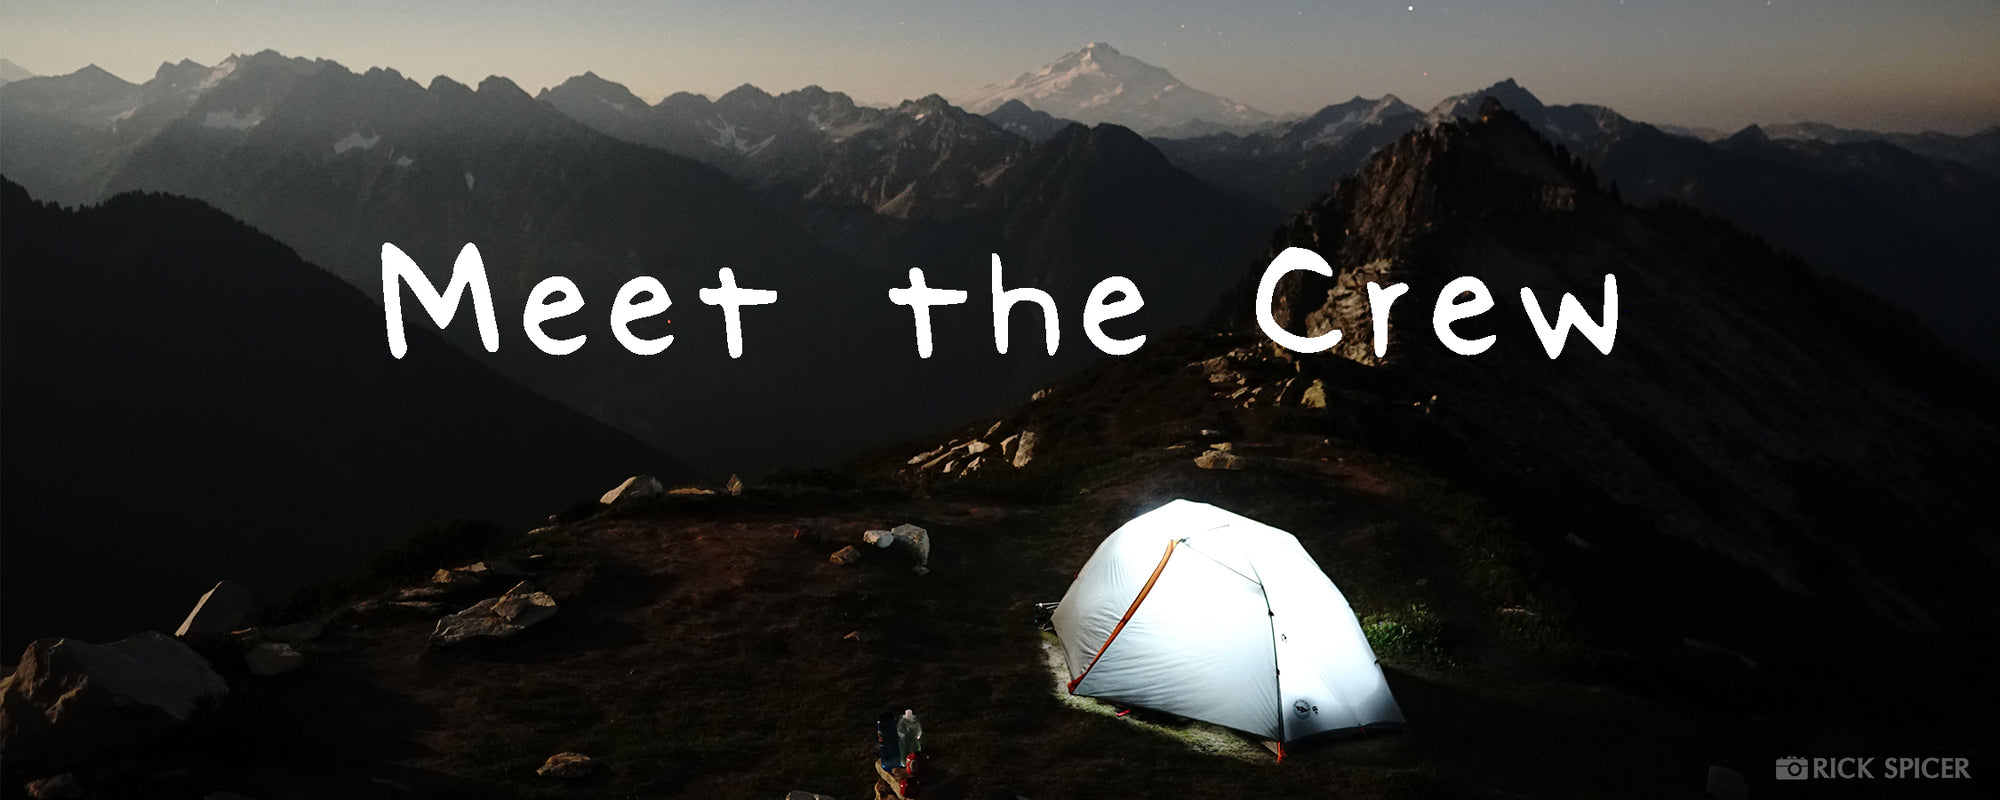 A tent set up in the North Cascades is lit up internally by a helmet, almost glowing. Mountains can be seen in the background.